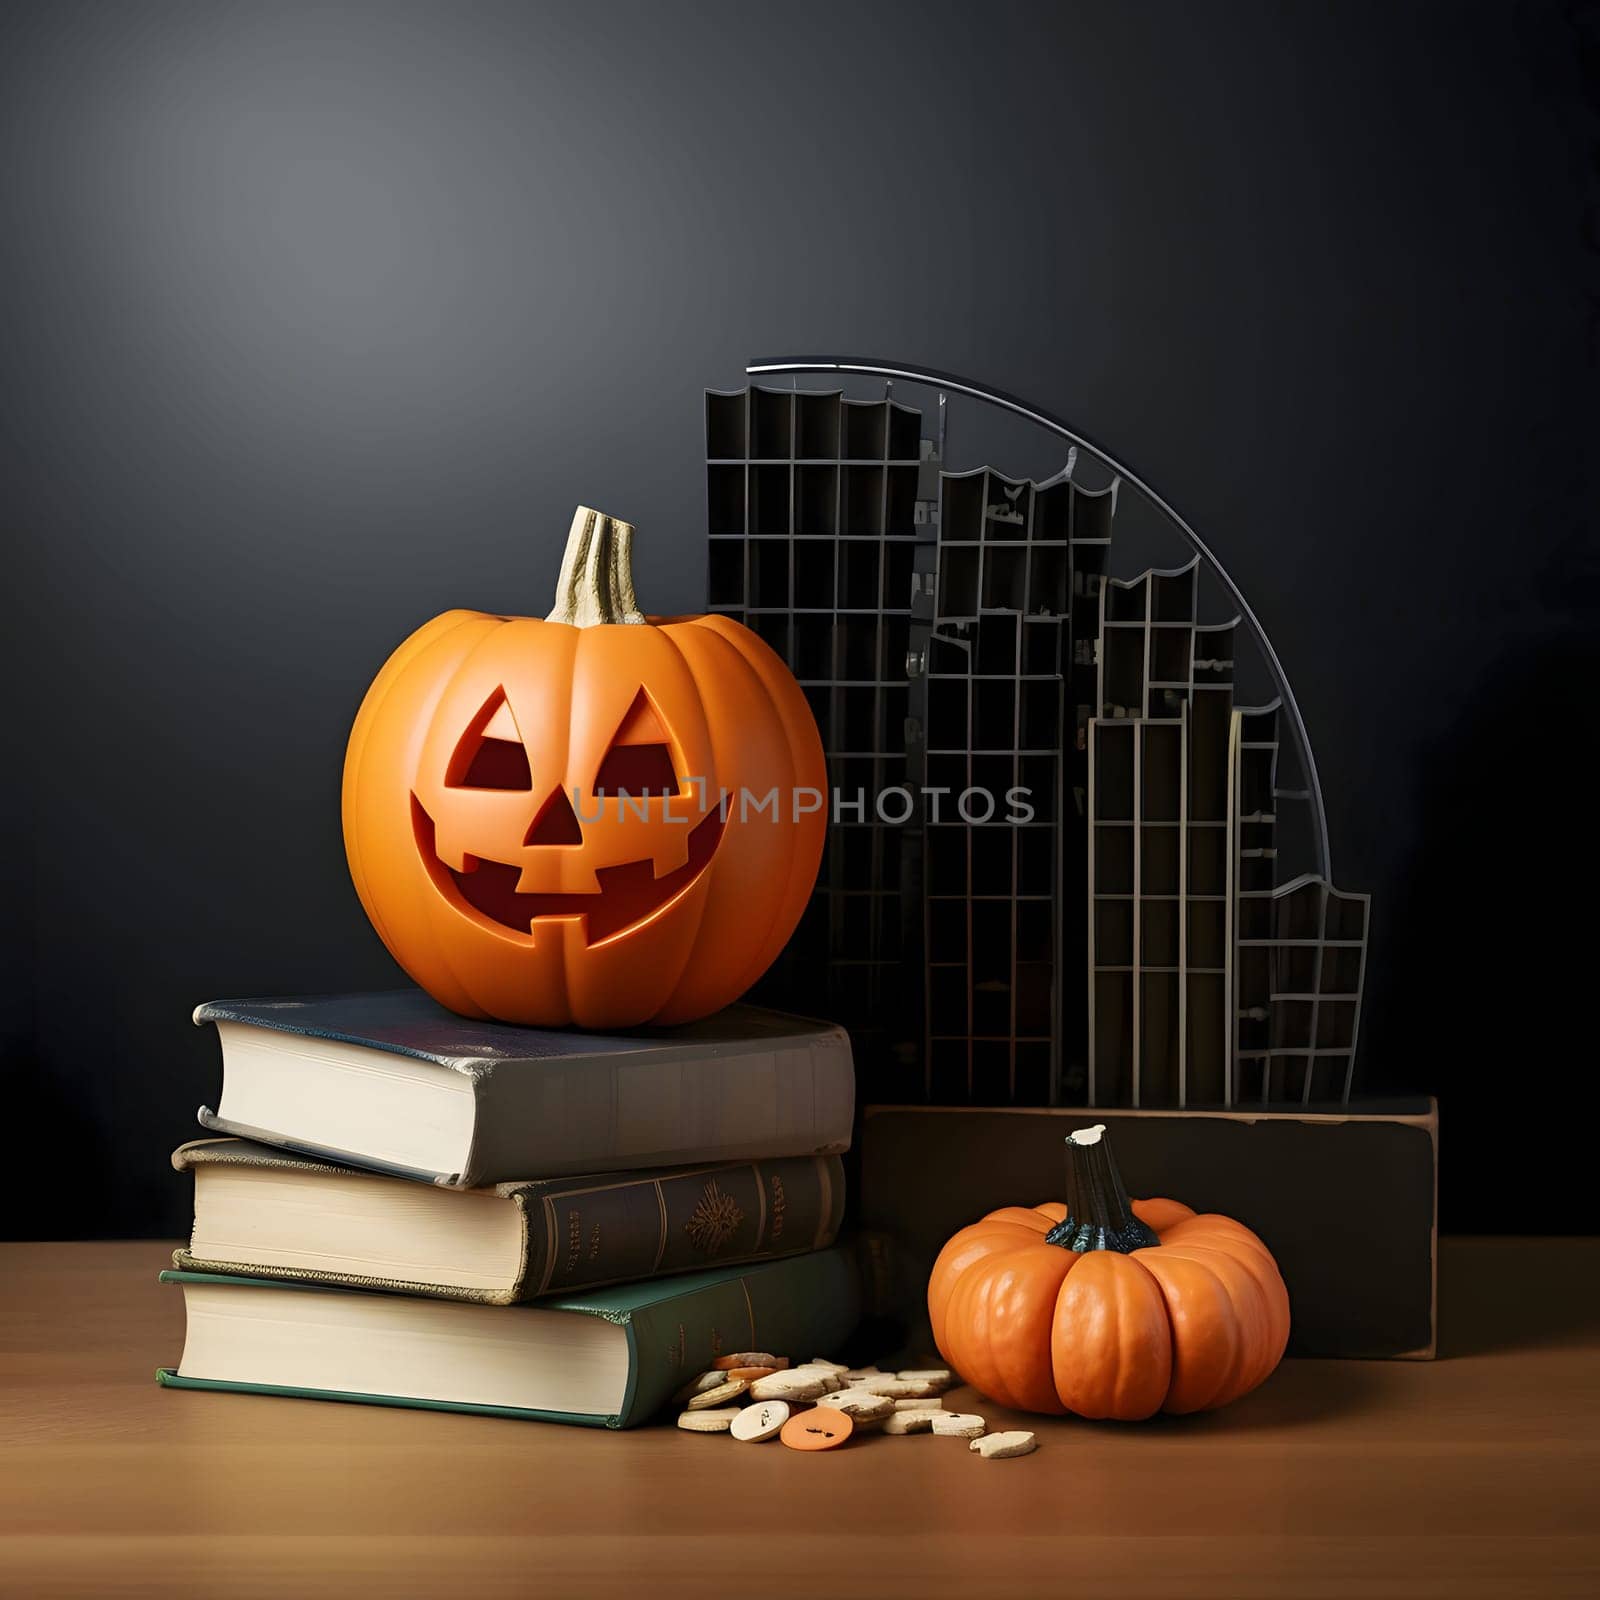 Jack-o-lantern pumpkin on a table on three books, a Halloween image. Atmosphere of darkness and fear.